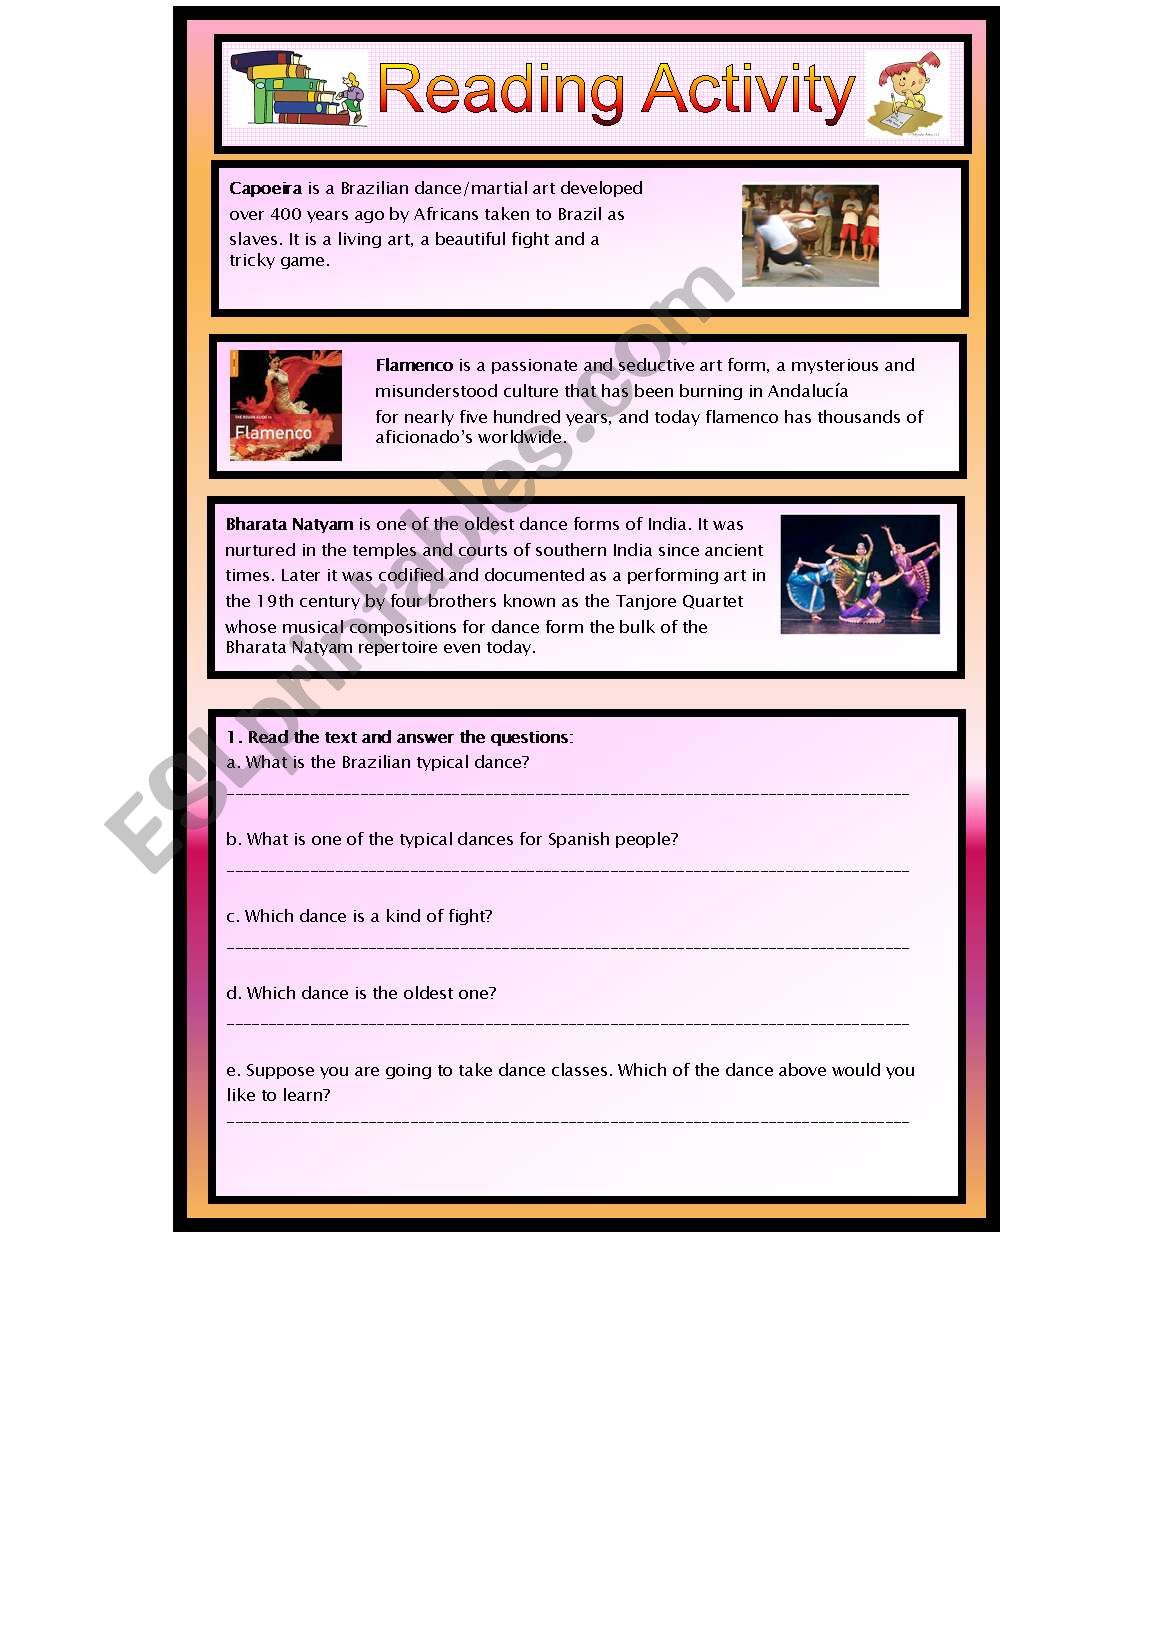 reading activity - kinds of dance - elementary